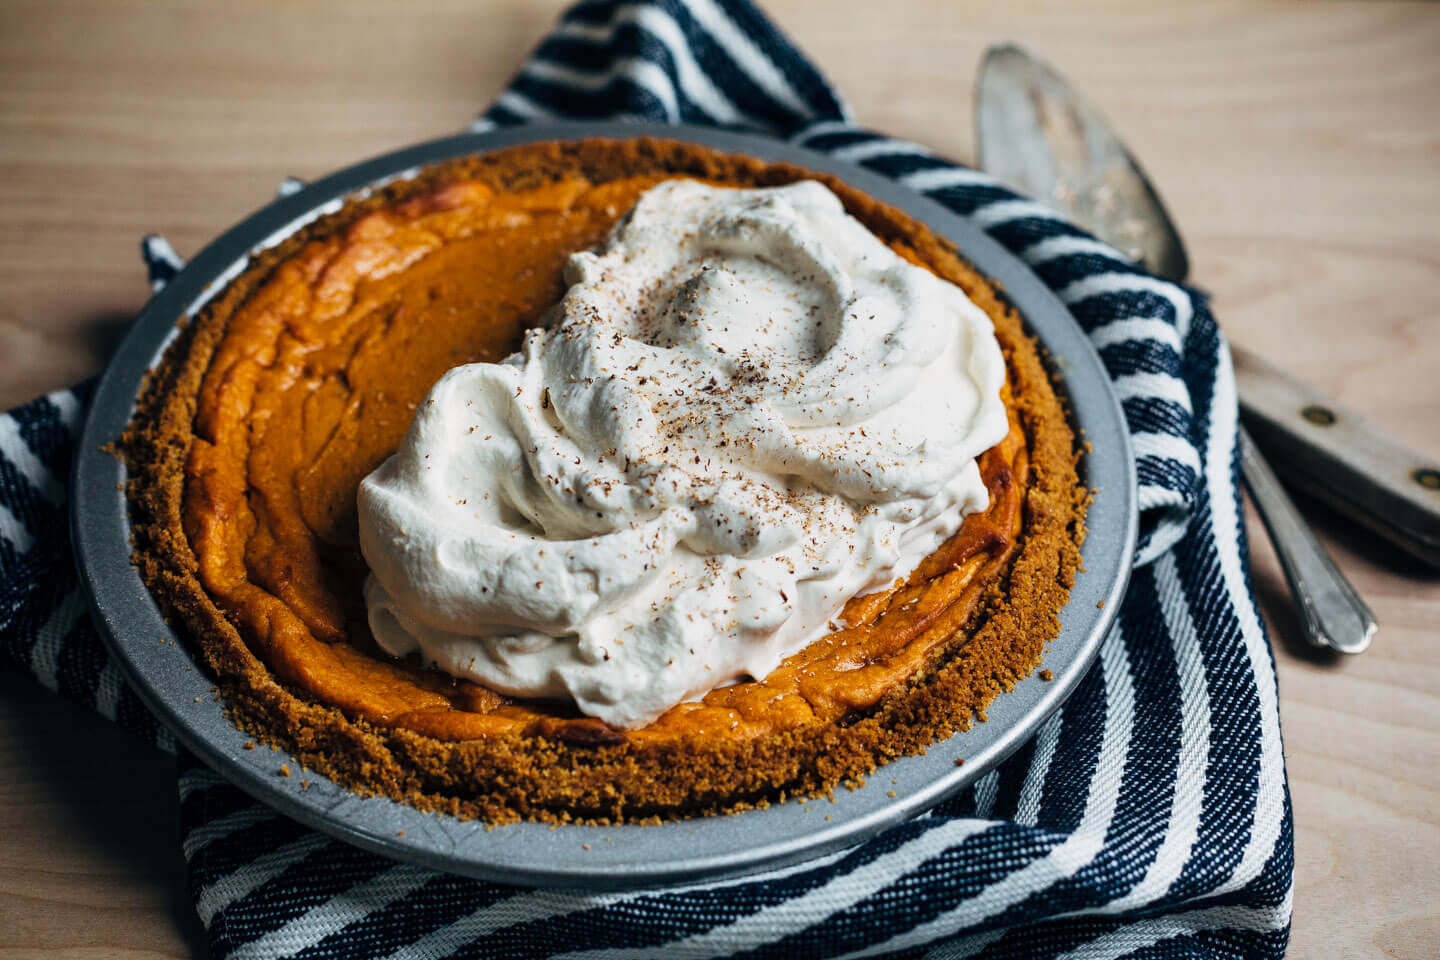 End your Thanksgiving feast with this light and silky bourbon-spiked sweet potato pie baked in a classic graham cracker crust and topped with a big dollop of brown sugar whipped cream. 